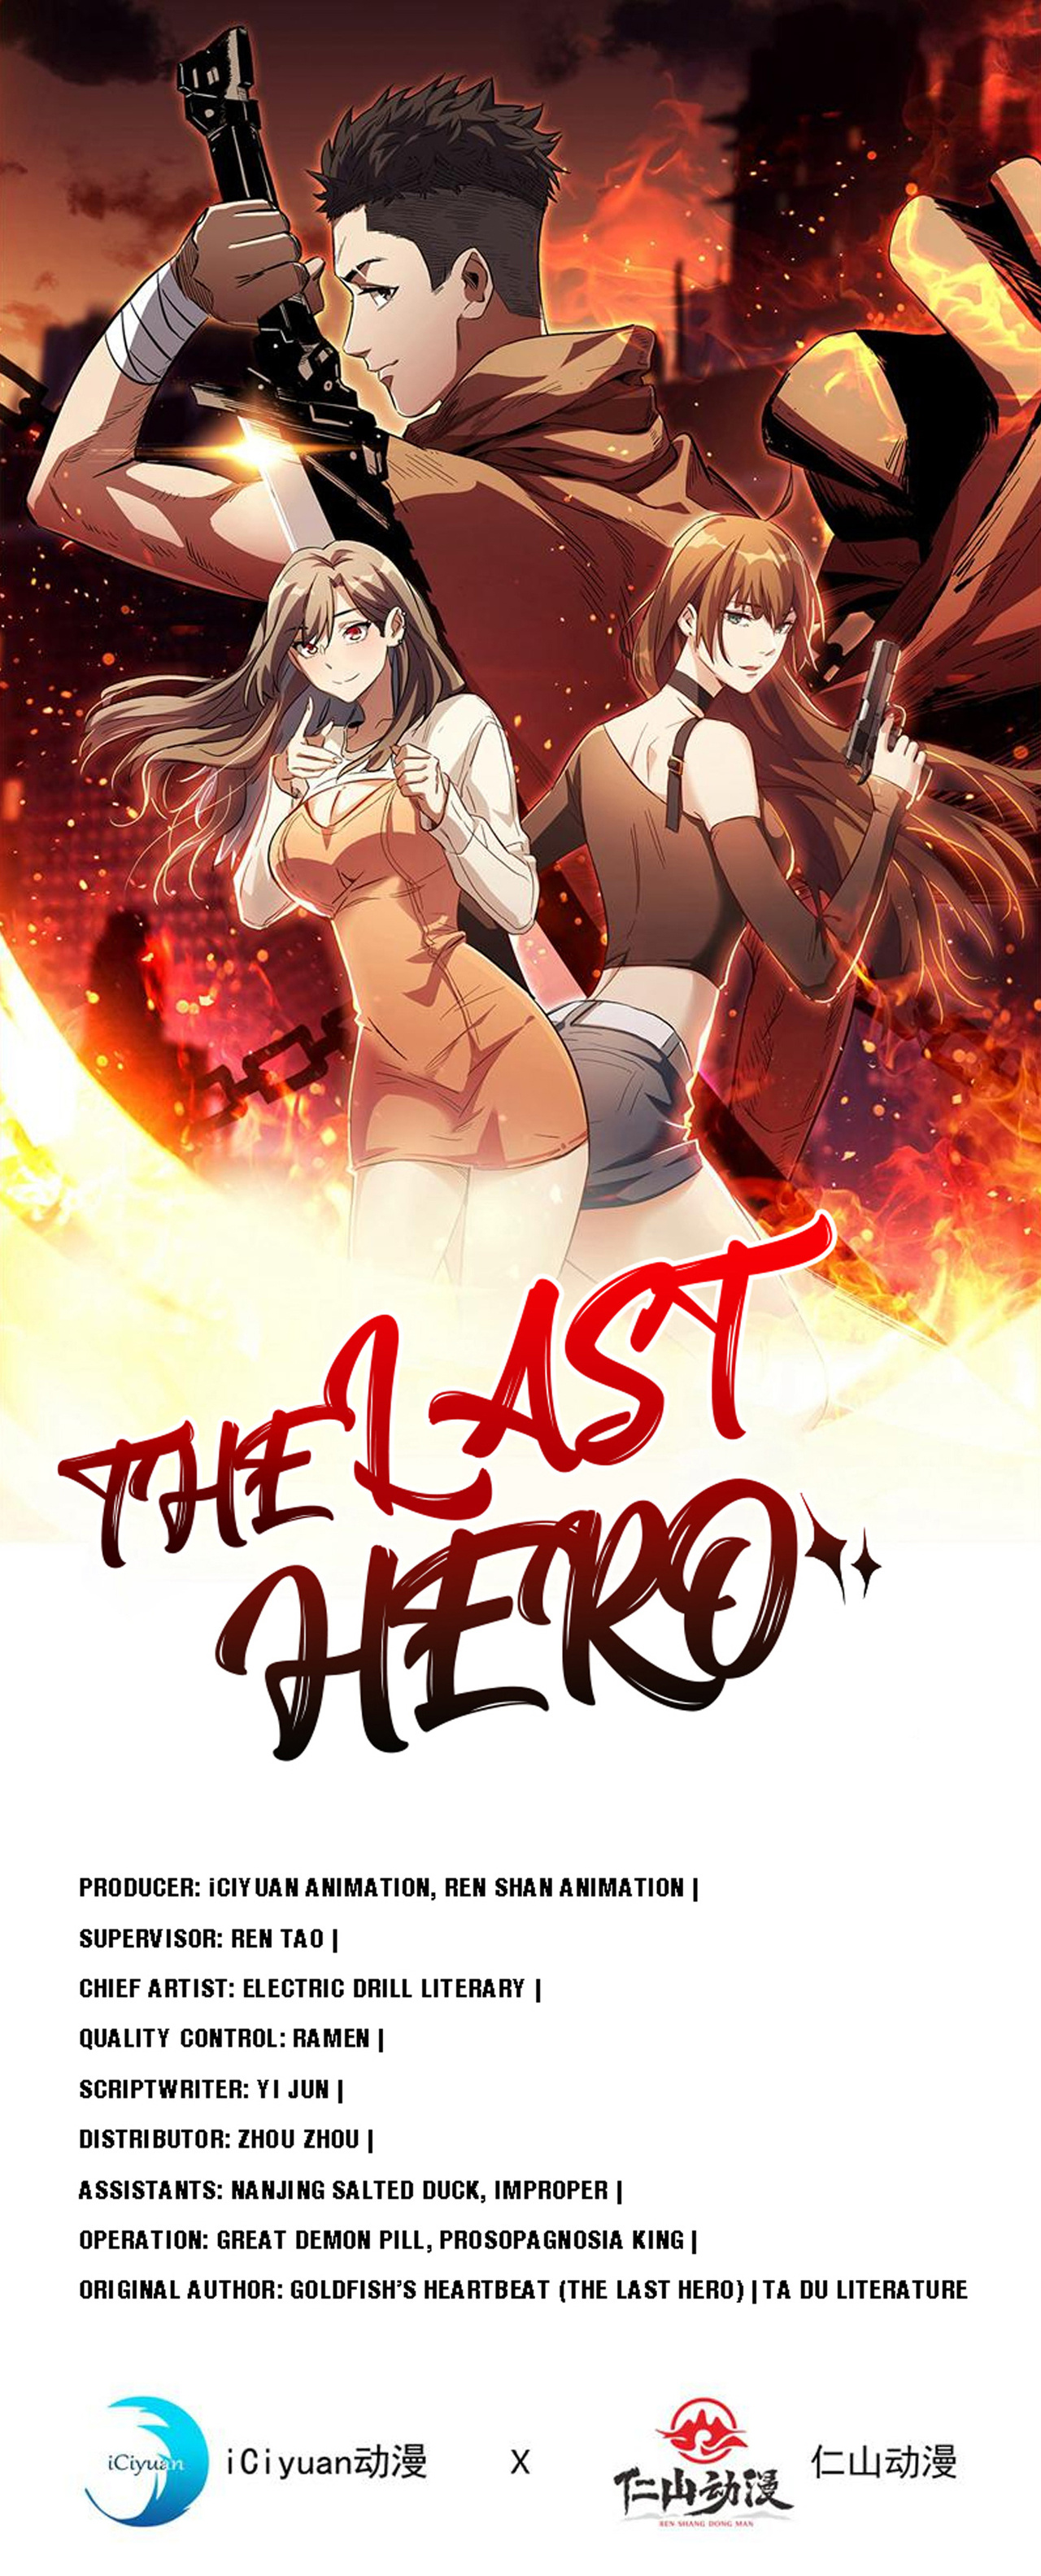 The Last Hero, I Am Picking up Attributes and Items in Last Days 132